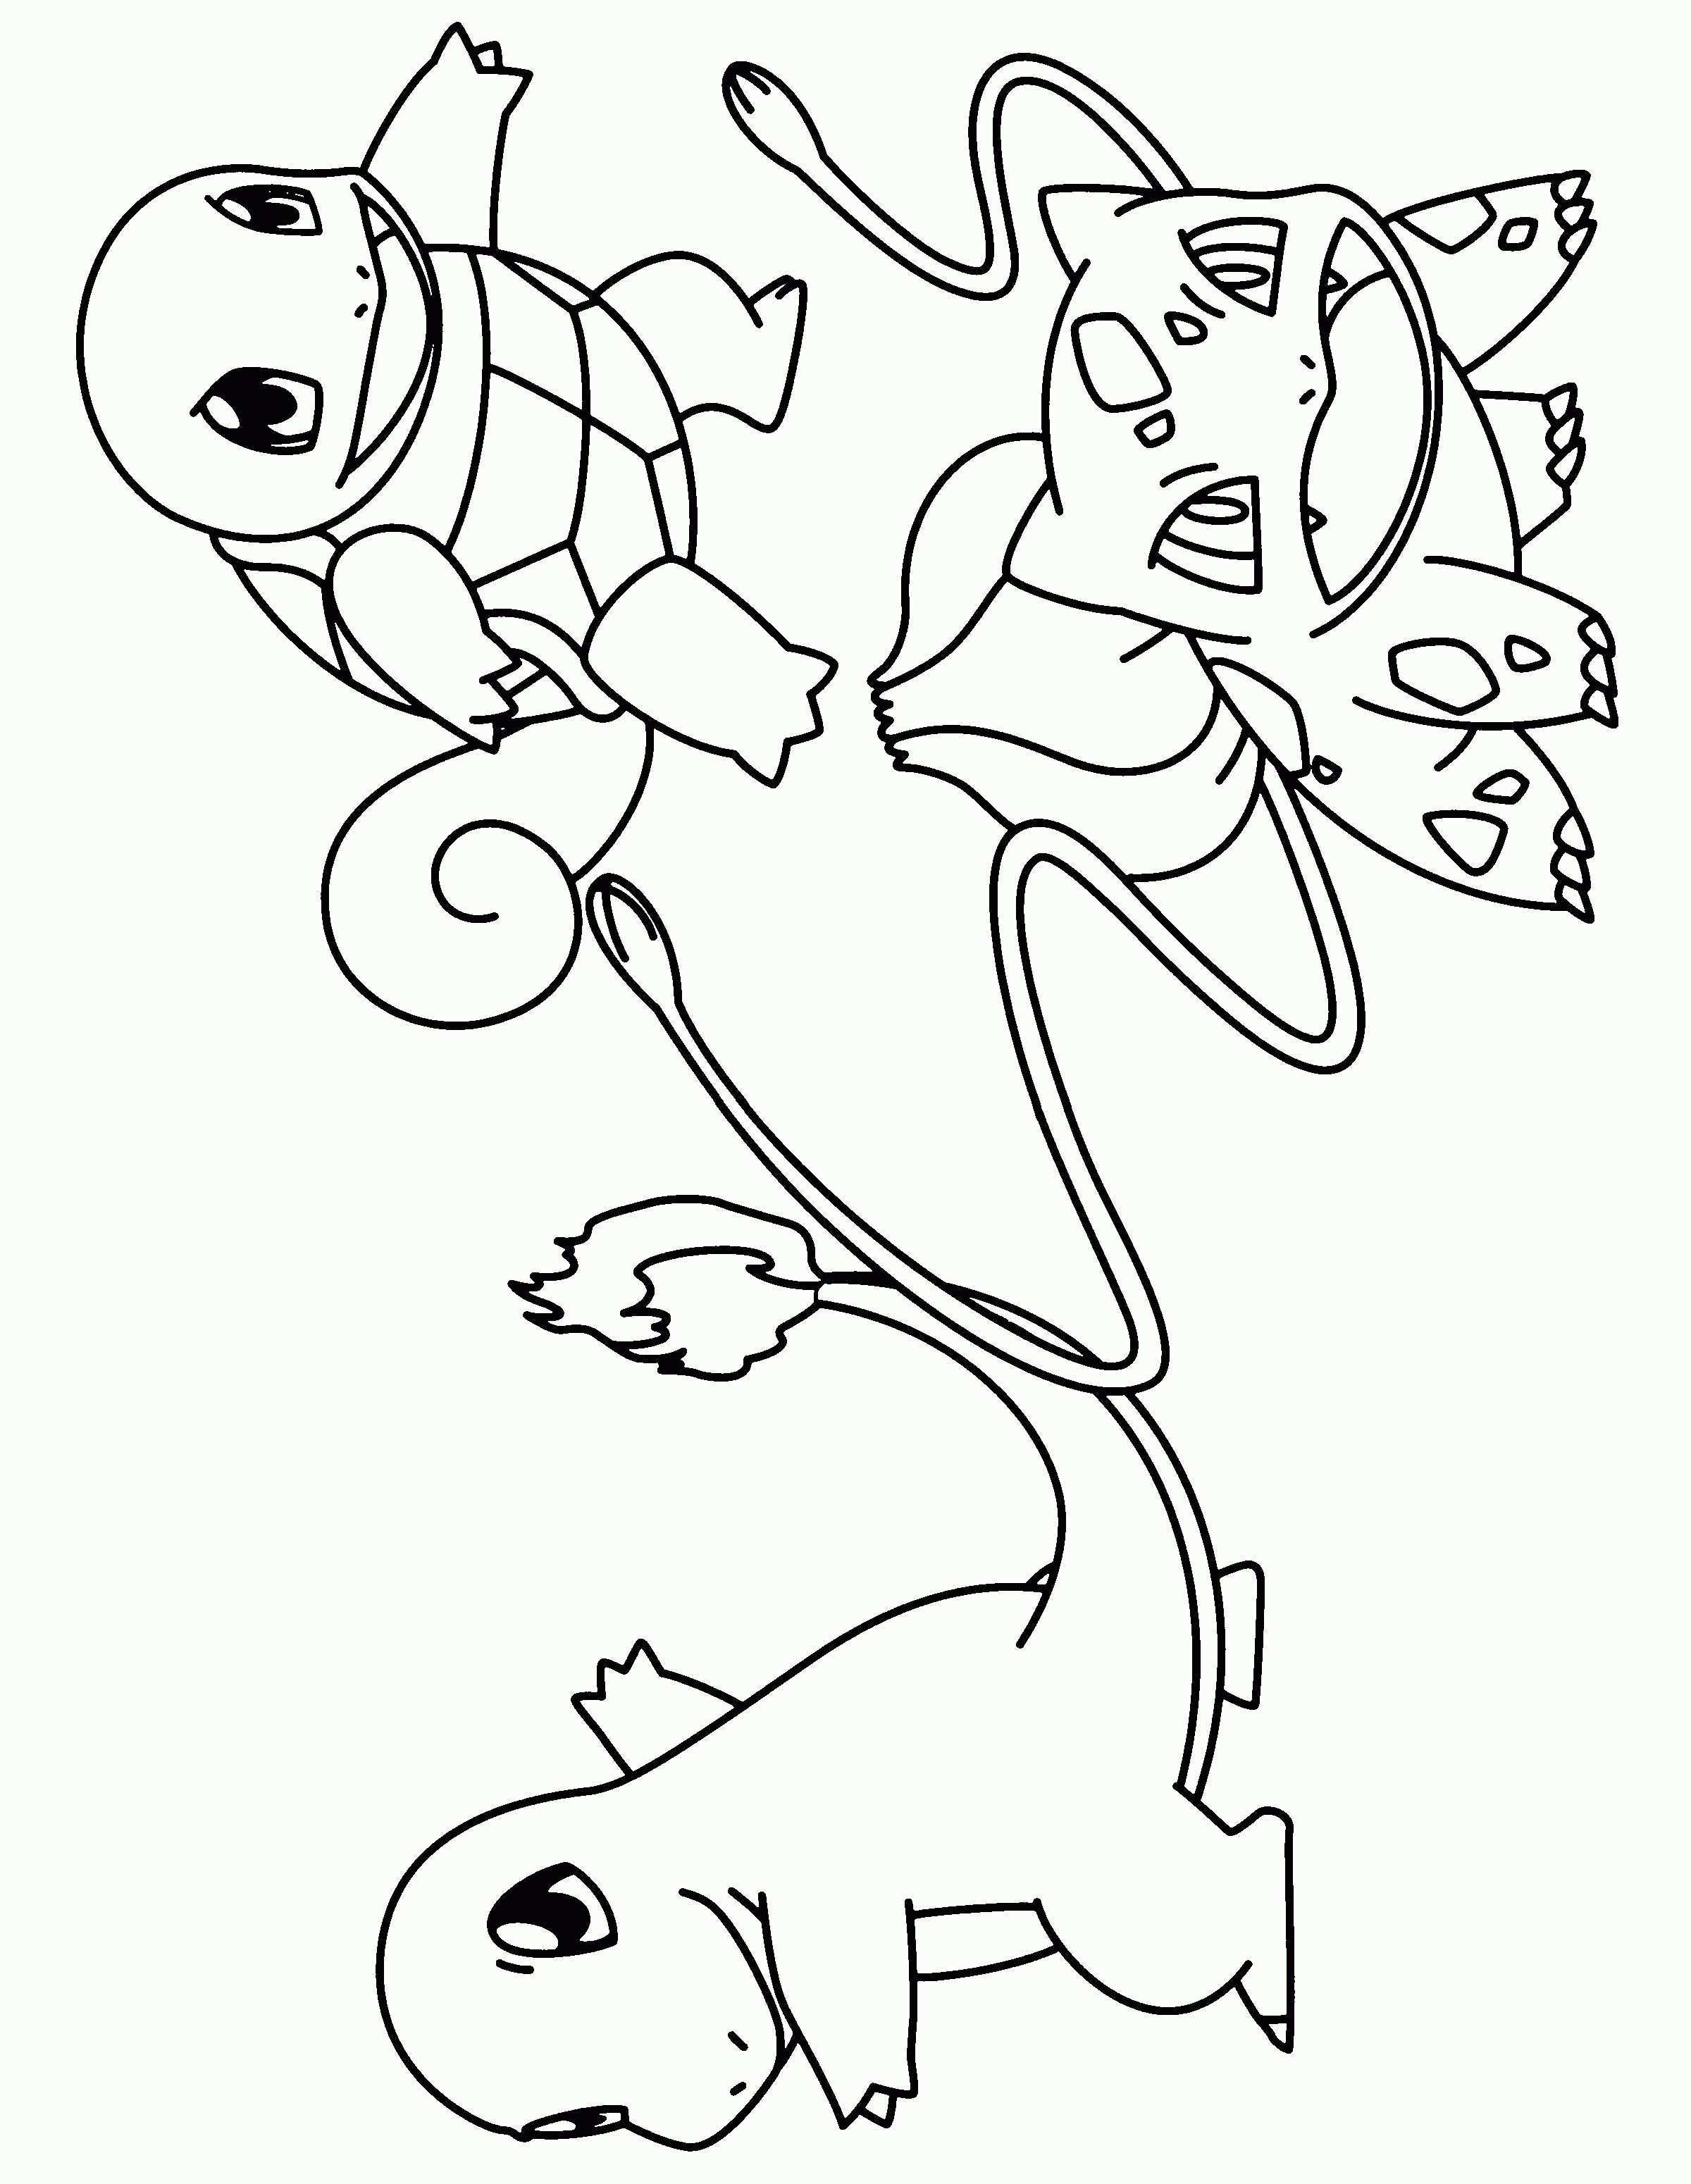 Squirtle Coloring Page With Pokemon Squirtle Coloring Pages Aecost Pokemon Coloring P